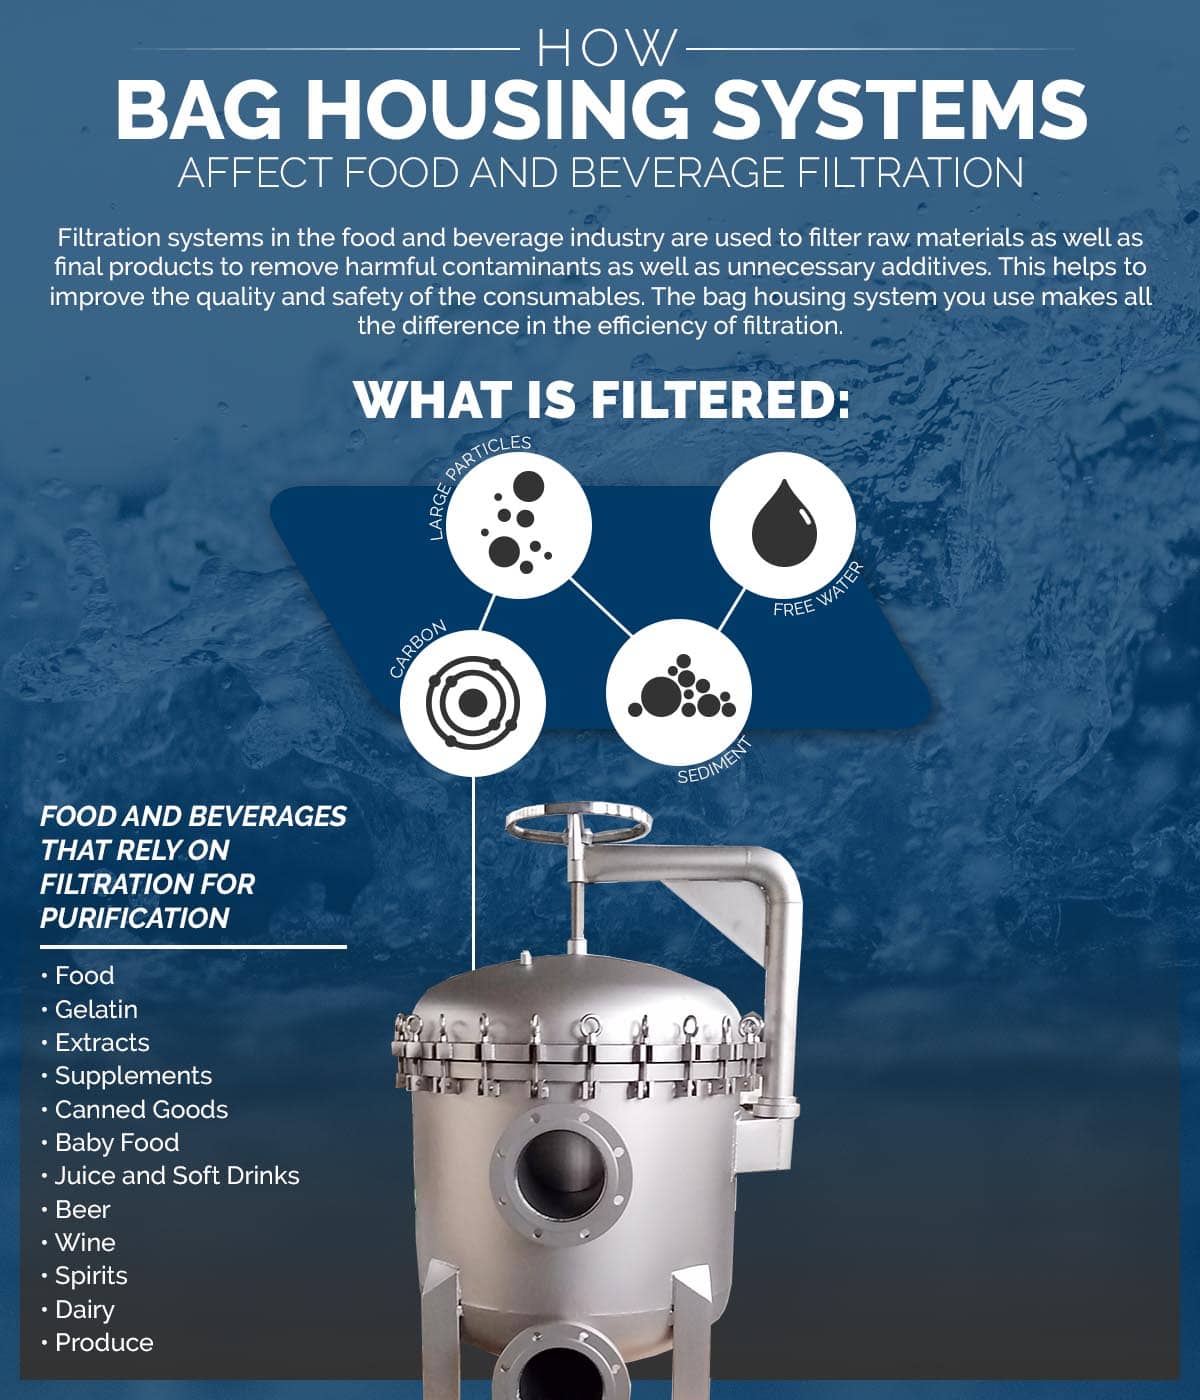 How-Bag-Housing-Systems-Affect-Food-and-Beverage-FiltrationMay2019-Infographic-001-5d2c957e5303c